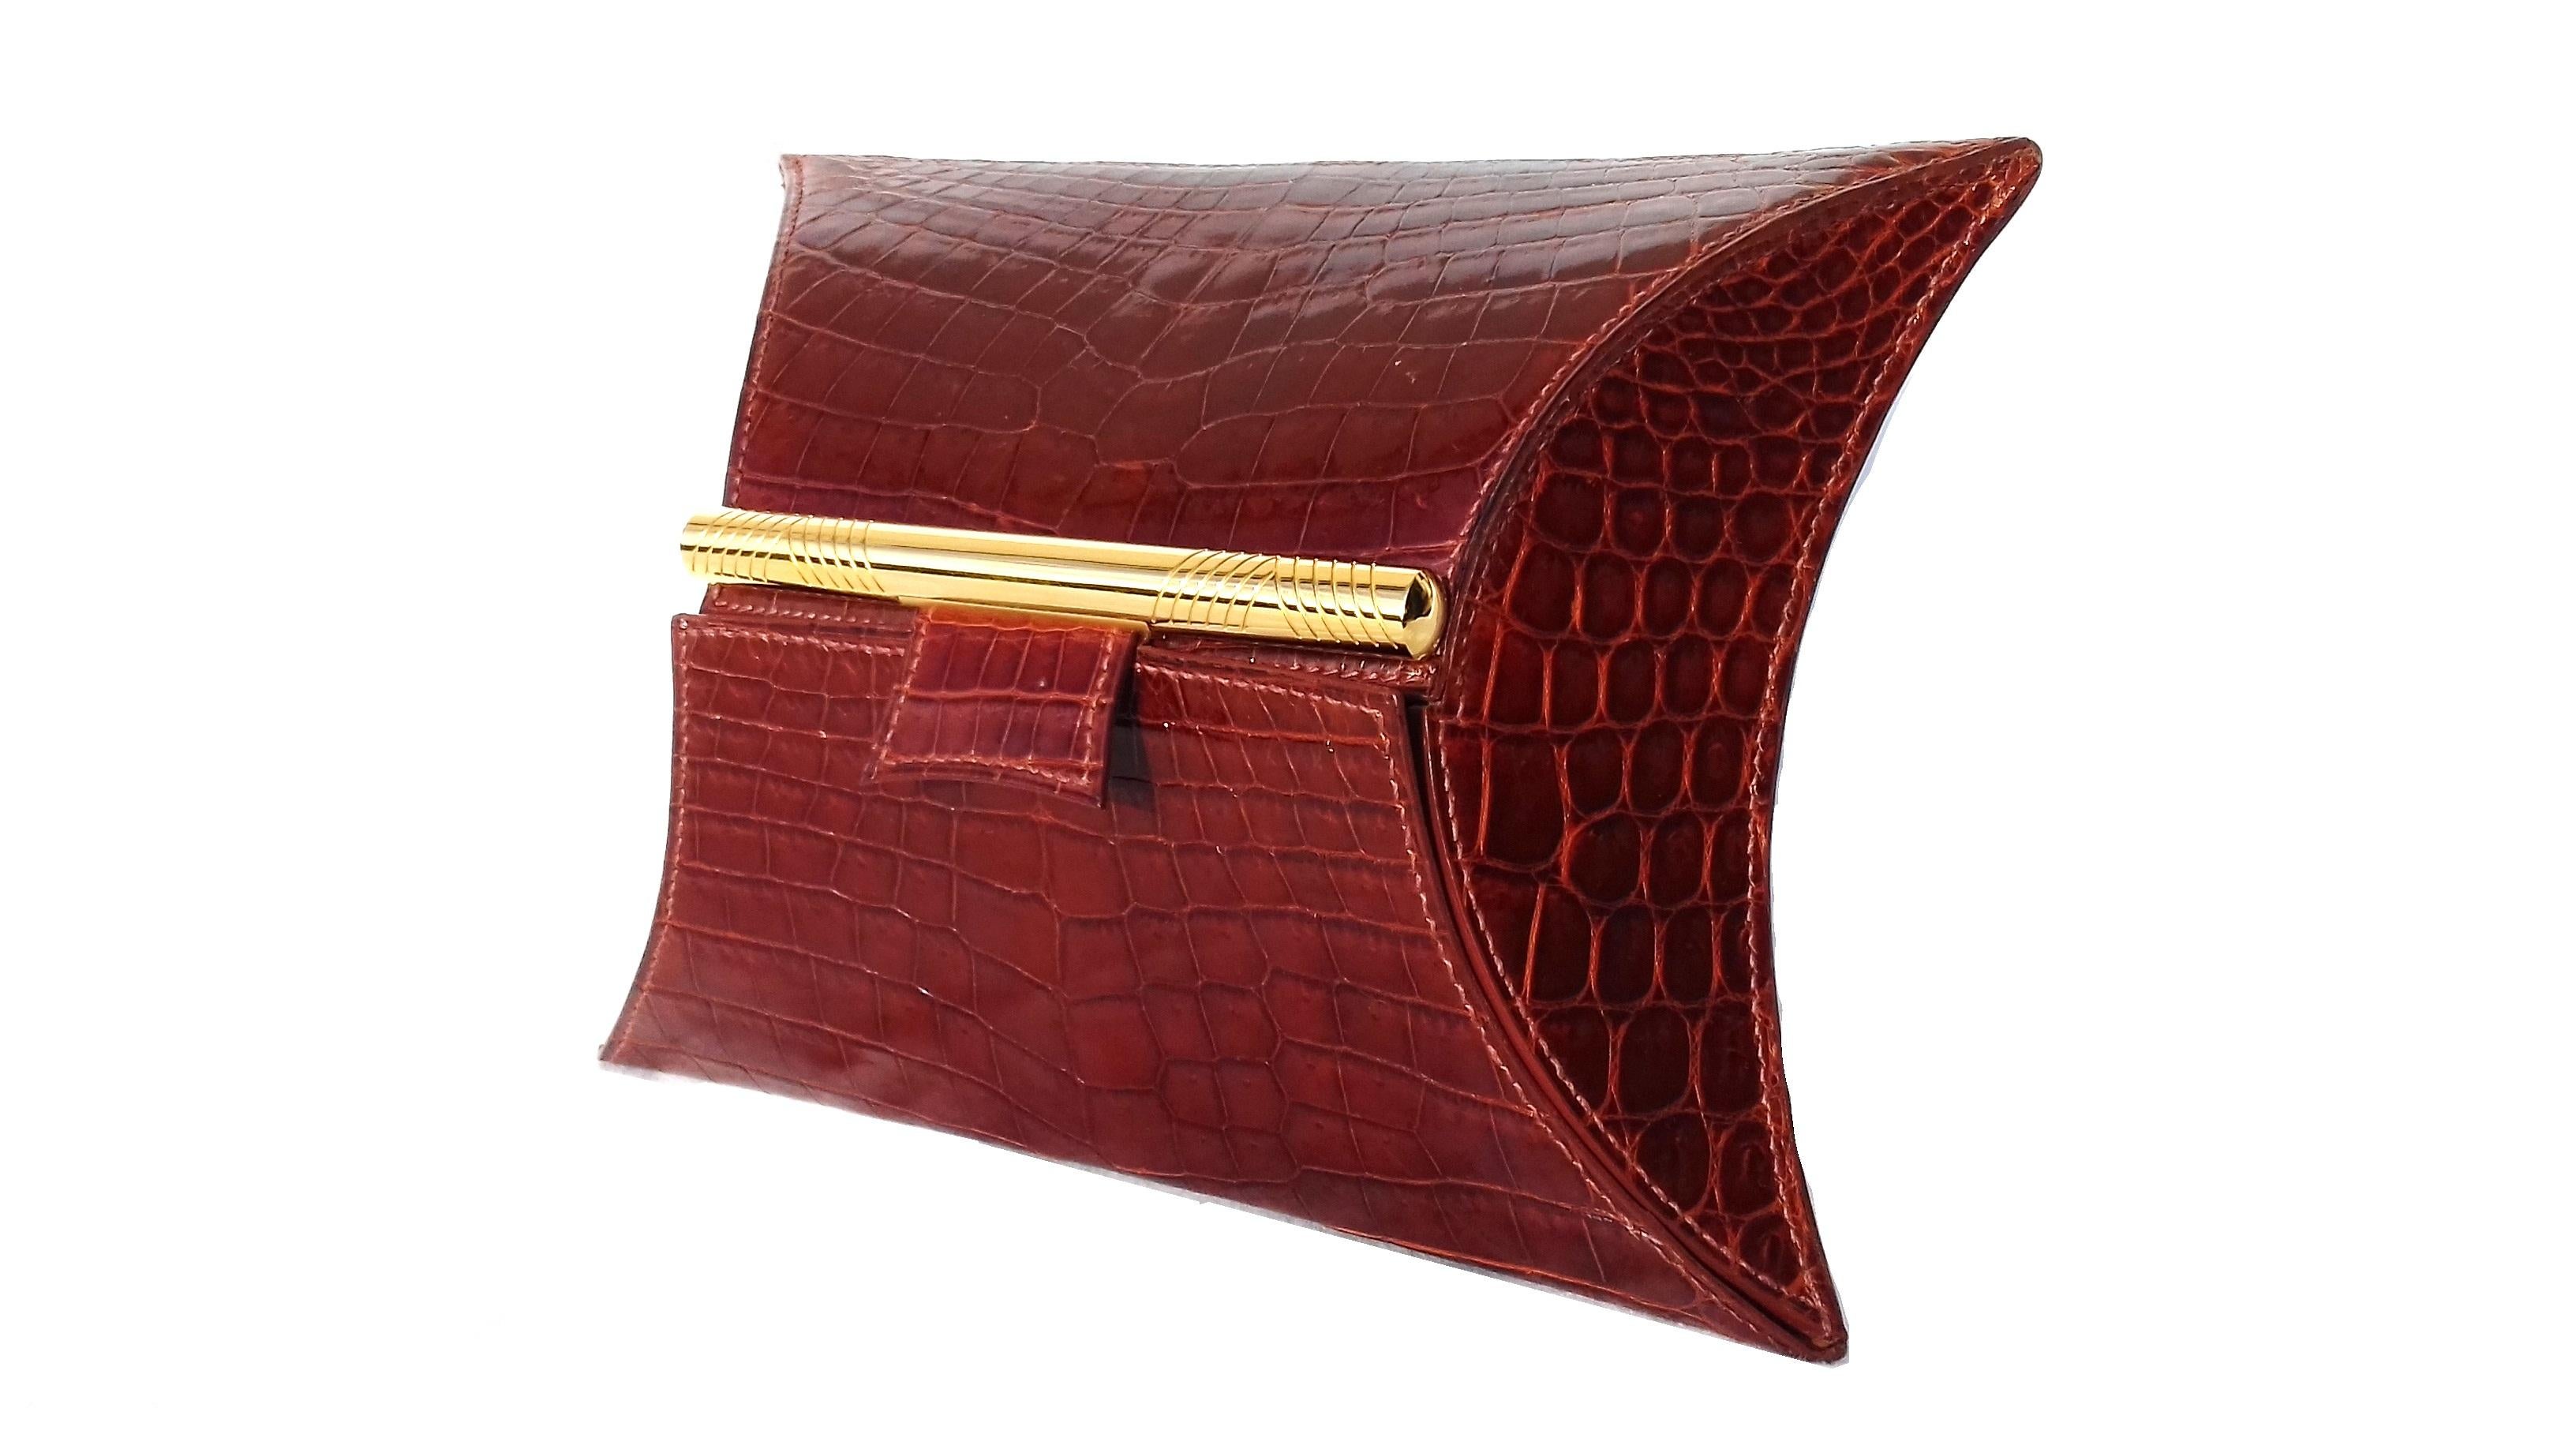 Absolutely Gorgeous Authentic Hermès Purse

Absolutely divine, a jewel

Made in France

Stamp A in square (1997)

Made of shiny niloticus crocodile and golden hardware

Lined with lamskin smooth leather

Colorway: Light Brown

